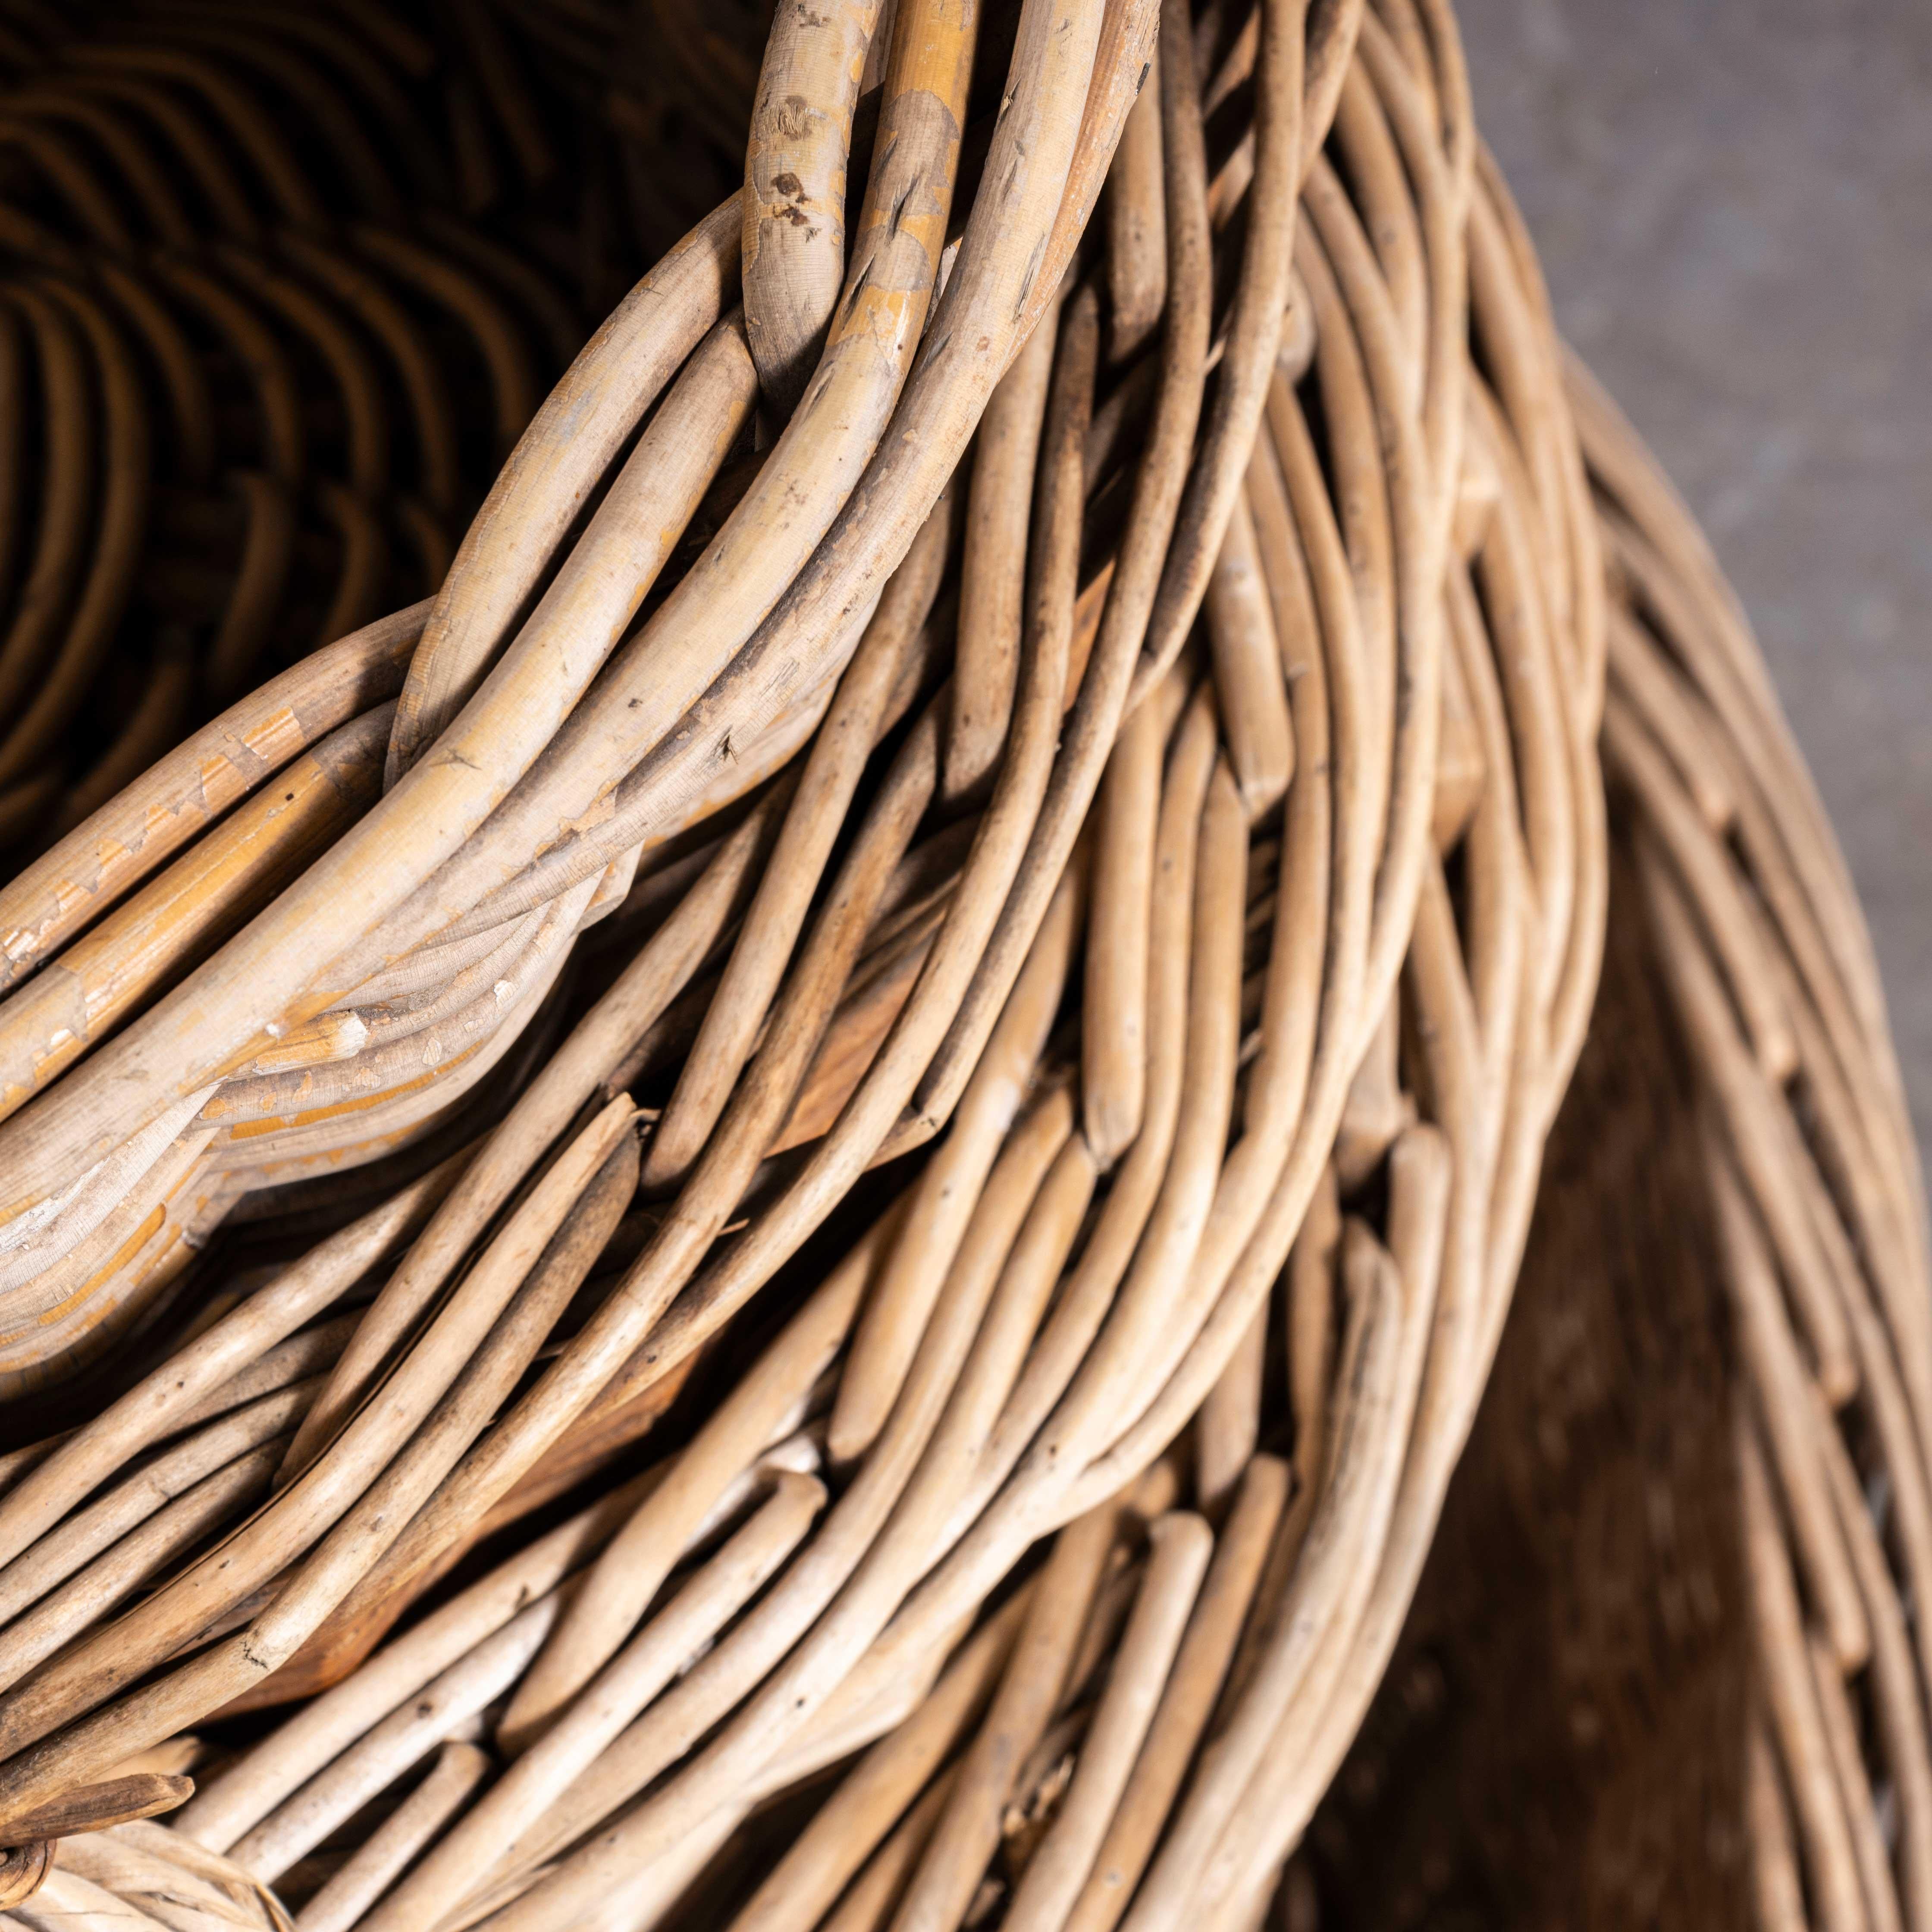 Mid-20th Century Original French Handmade Oval Willow Baskets For Sale